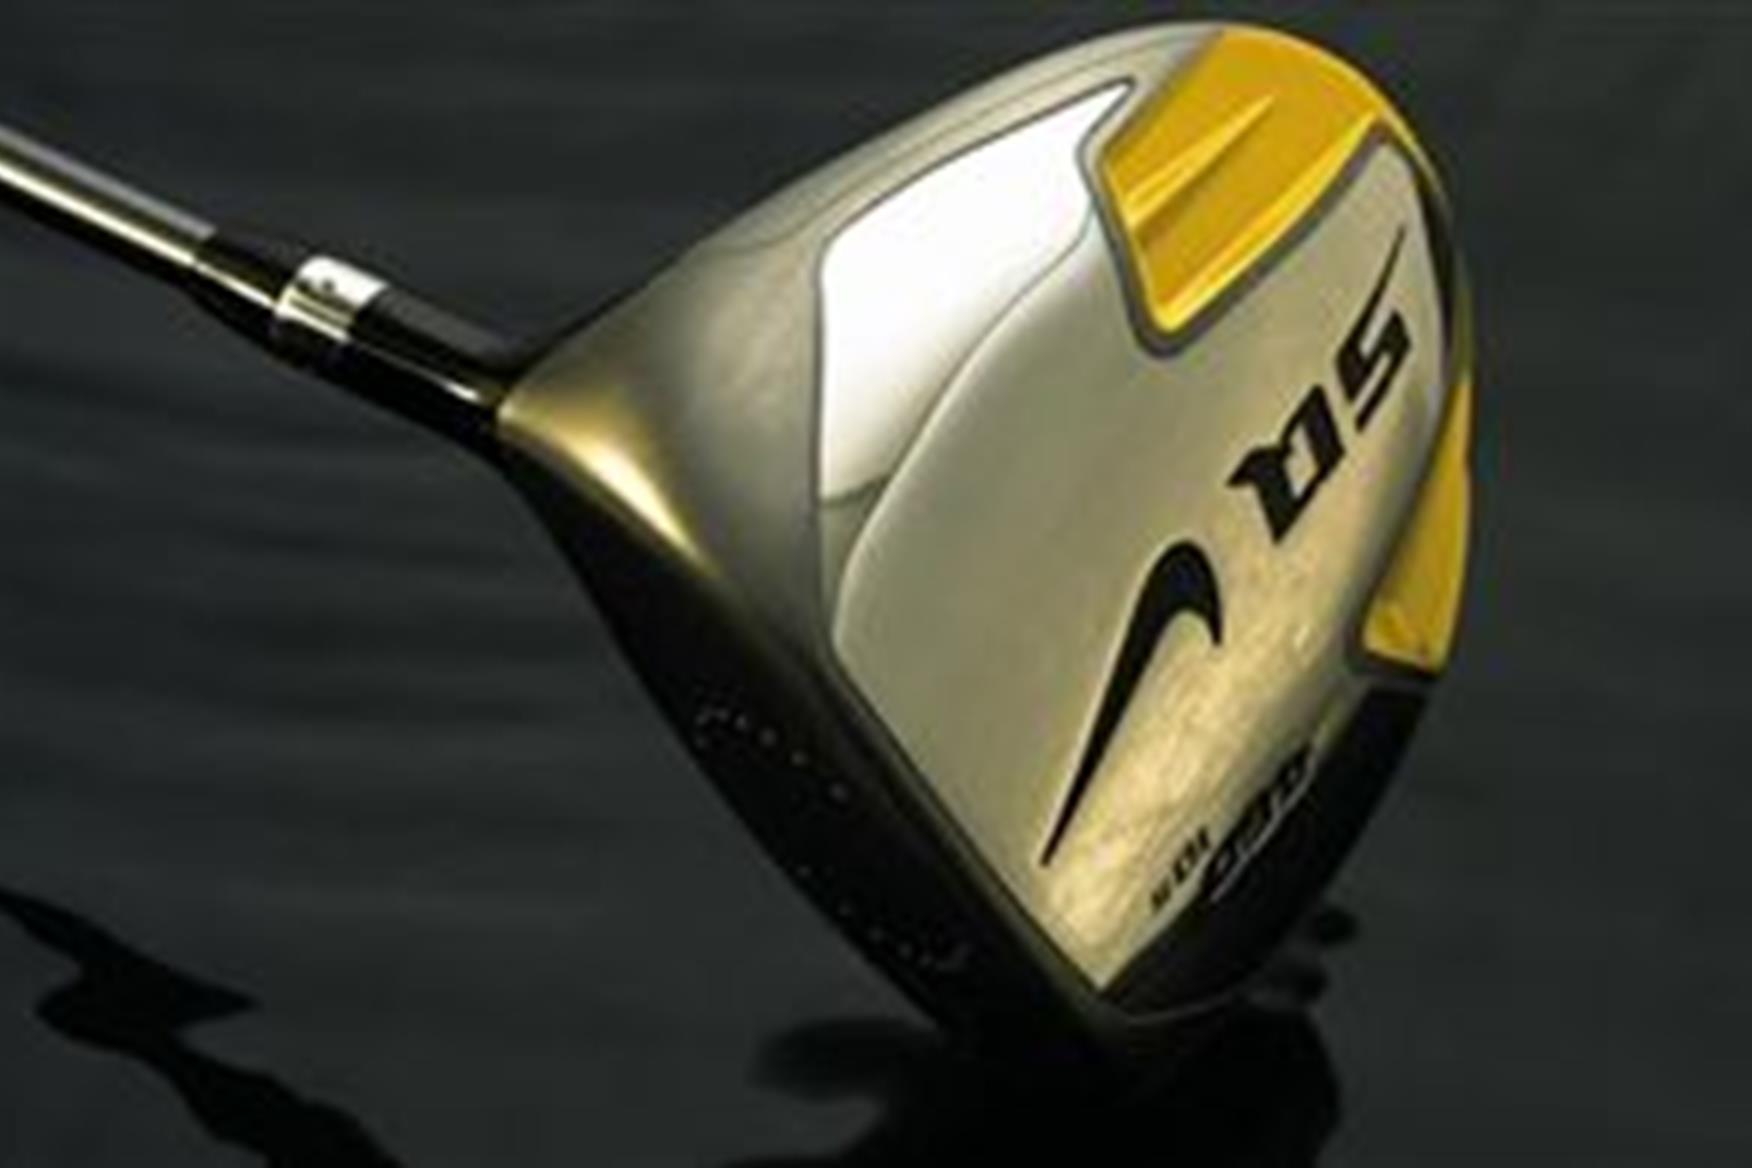 Nike Golf SQ 460 Driver Review 